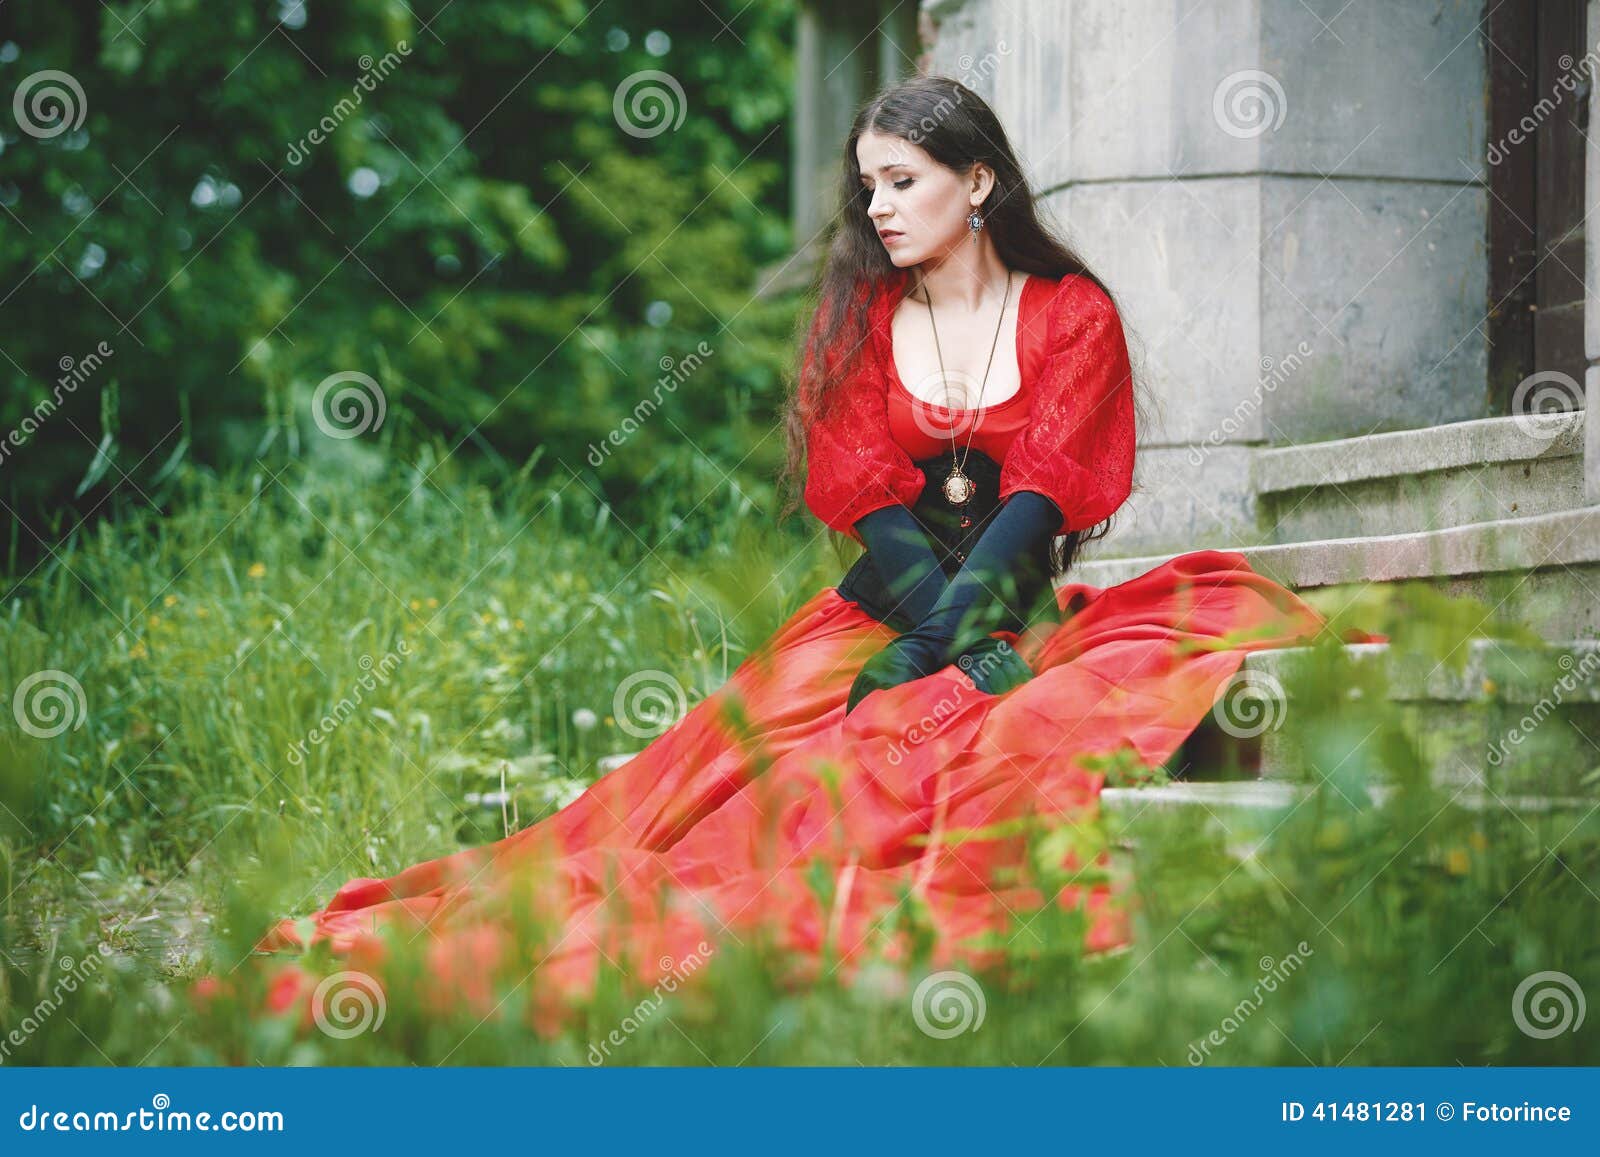 woman in red victorian dress